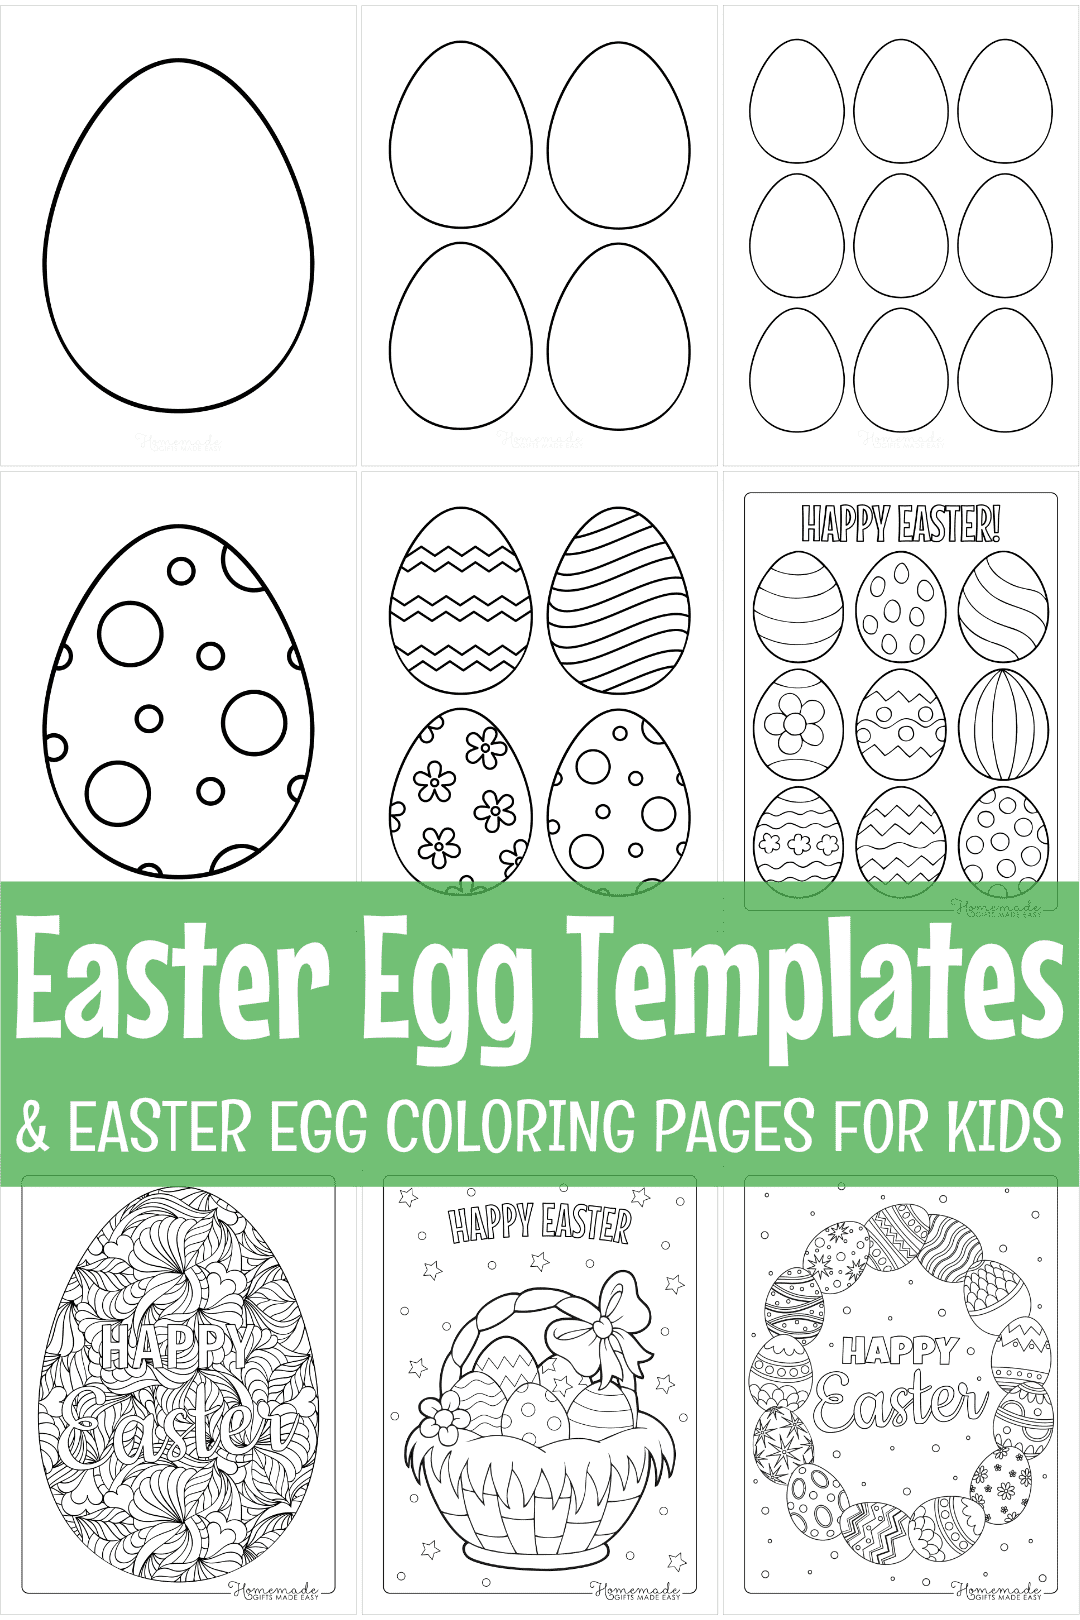 66 free printable Easter egg coloring pages and templates